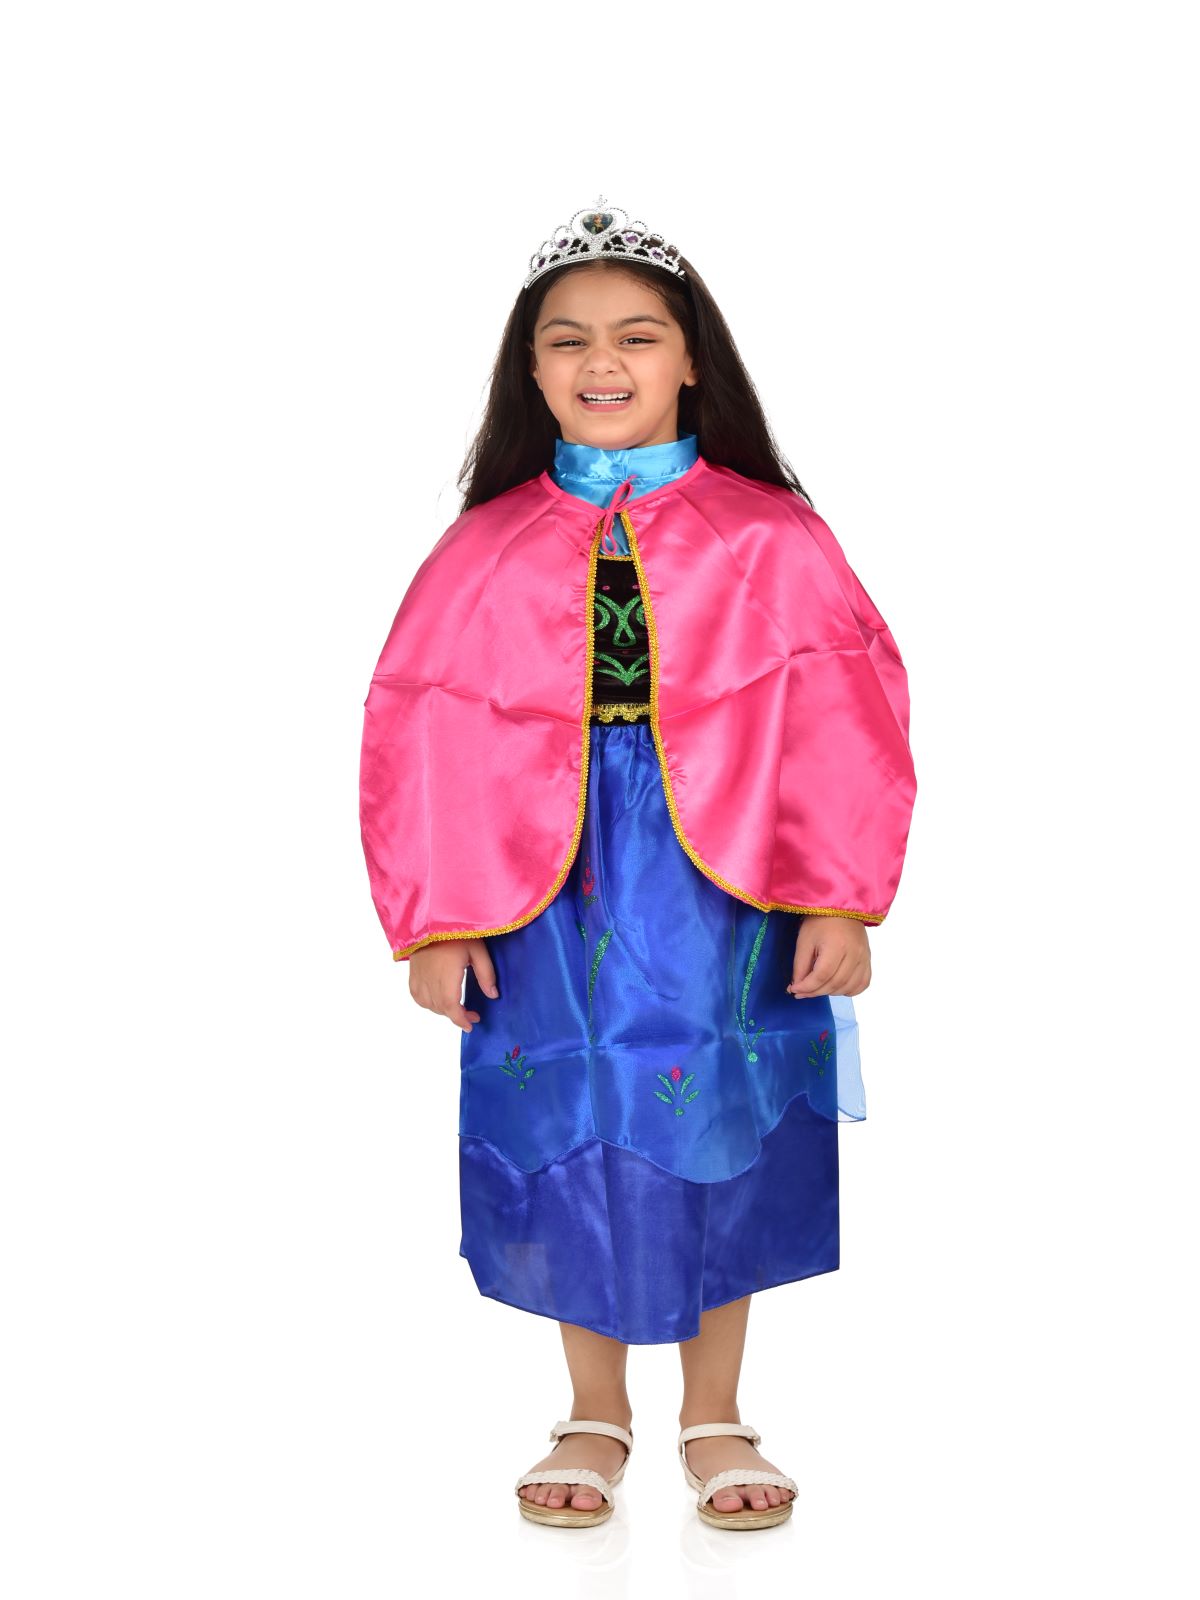 Girls Wonderland Gflock Party Frocks Perfect For Carnival, Artistic  Shooting And Princess Costume Parties Q0716 From Sihuai04, $9.7 | DHgate.Com